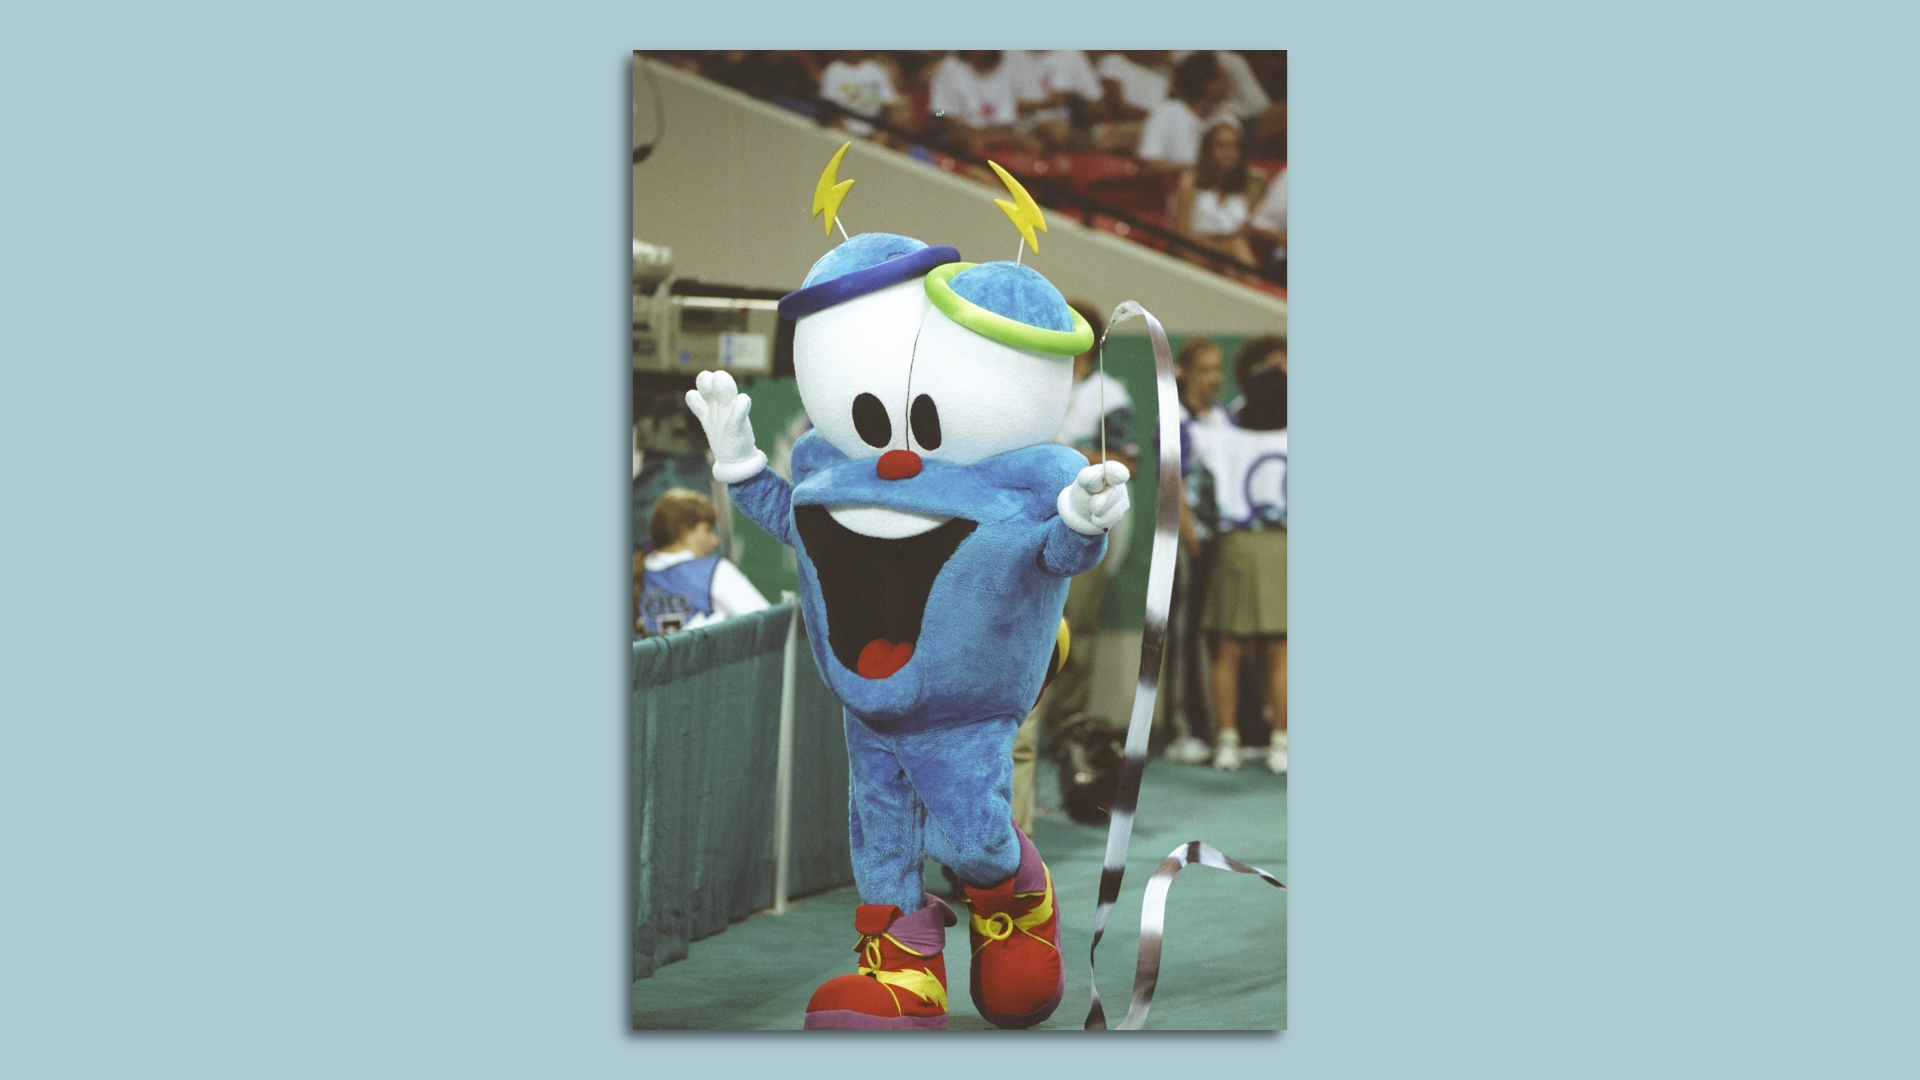 A photo of a blue mascot with a big smile and eyes and lightning bolts for eyebrows waves a streamer